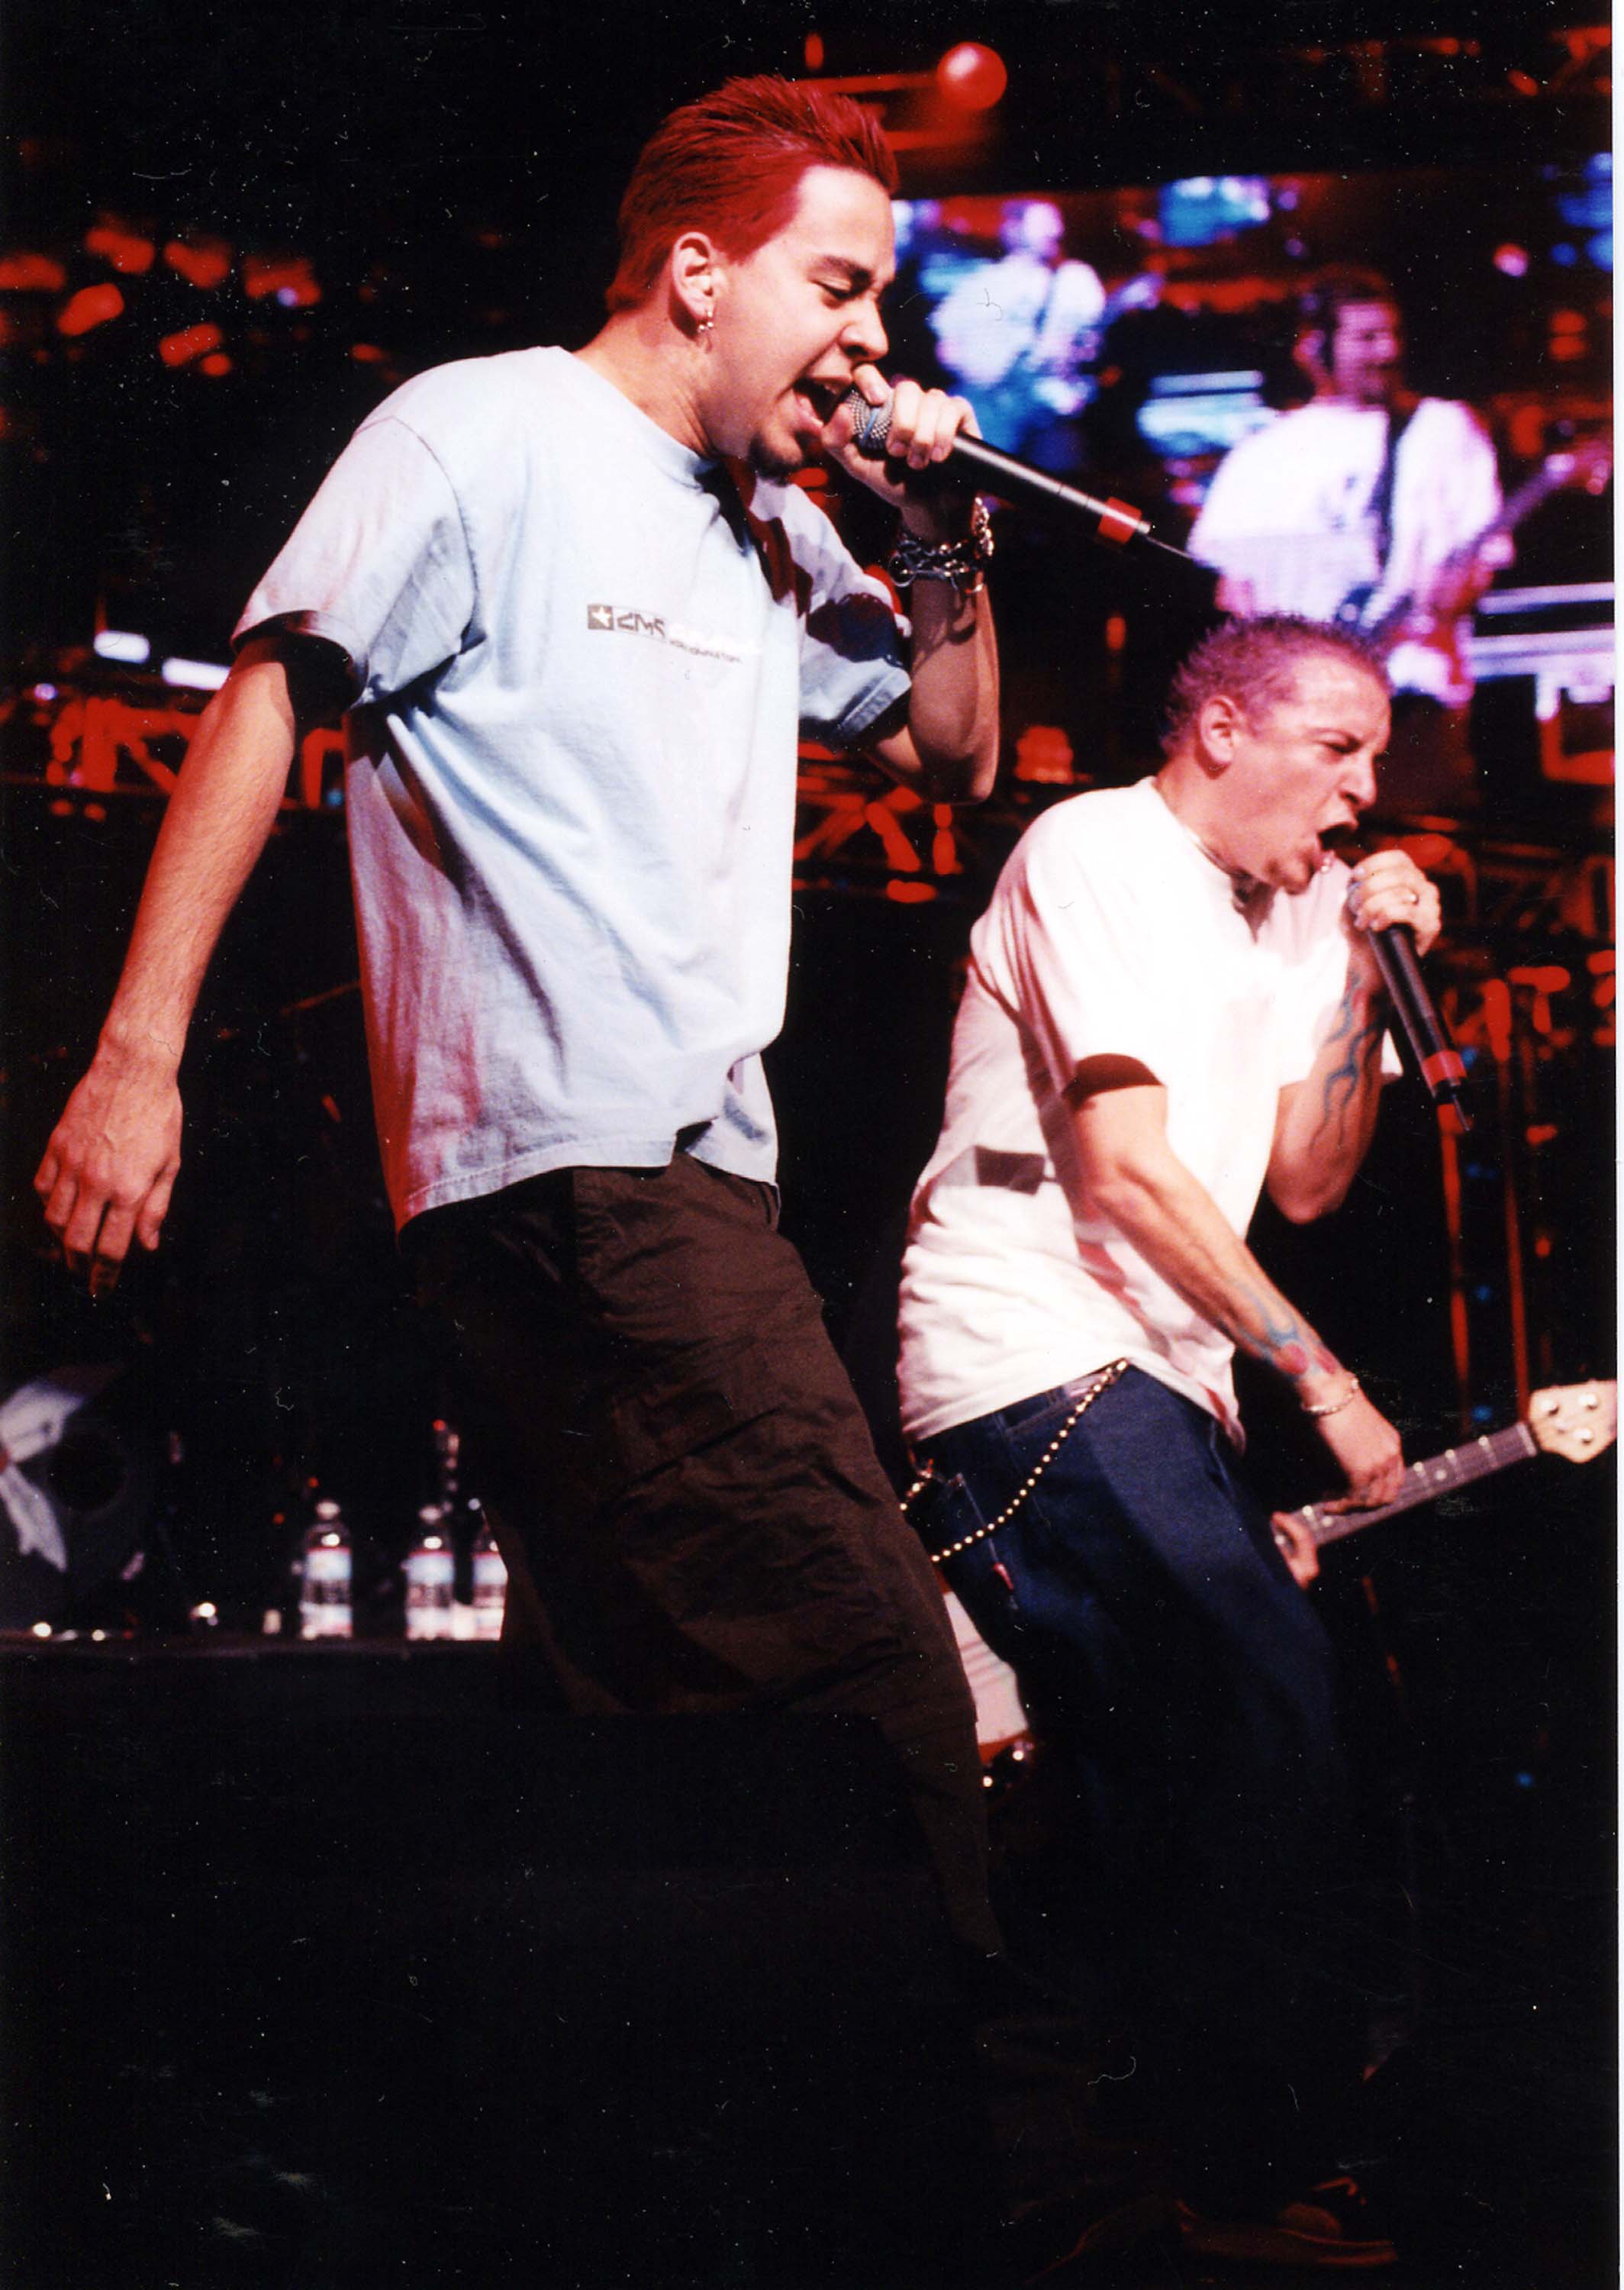 Linkin Park’s <i></noscript>
<p>“One of the cool things about this package is, everyone like scoured their basements or attics for like original, unique content — like fliers from shows and demos we passed out, standing in front of the Troubadour, trying to win fans one at a time,” Delson says. “We found a whole DVD’s worth of footage from 20 years ago, and so I was watching myself, back at that time, and just thinking, ‘That dude seems really young’ and it was a crazy roller coaster ride to be on, at any age — certainly when one is still becoming an adult.”</p>
<p>When asked if Linkin Park are working on new songs for their eighth studio record, Delson smiled widely — knowingly. “I think everything is open,” he explained. “Certainly, a lot is undefined, but I think the possibility is wide open.”</p>
</p></p>    <div class=